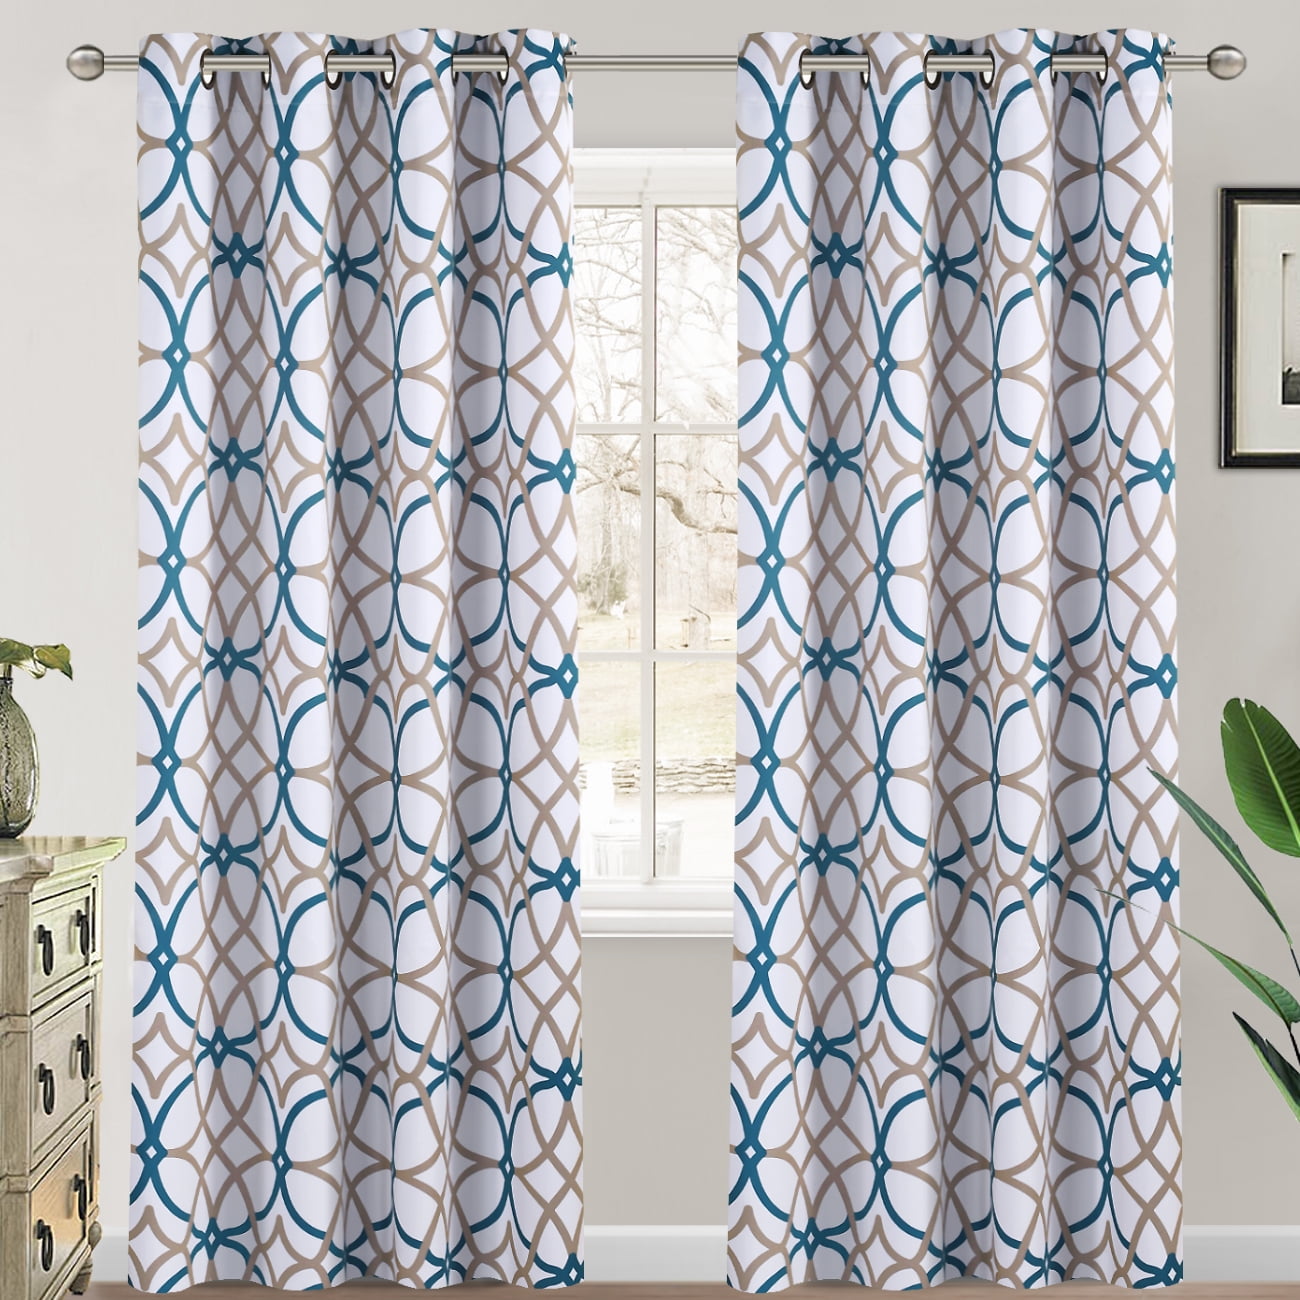 Amazon.com: 102 Inches Long Cream Living Room Curtains 2 Panels Set Grommet Ring  Top Linen Drapes for Patio Sliding Door Light Filtering Modern Bohemian 102  Inch Curtain for Large Window Dining Office